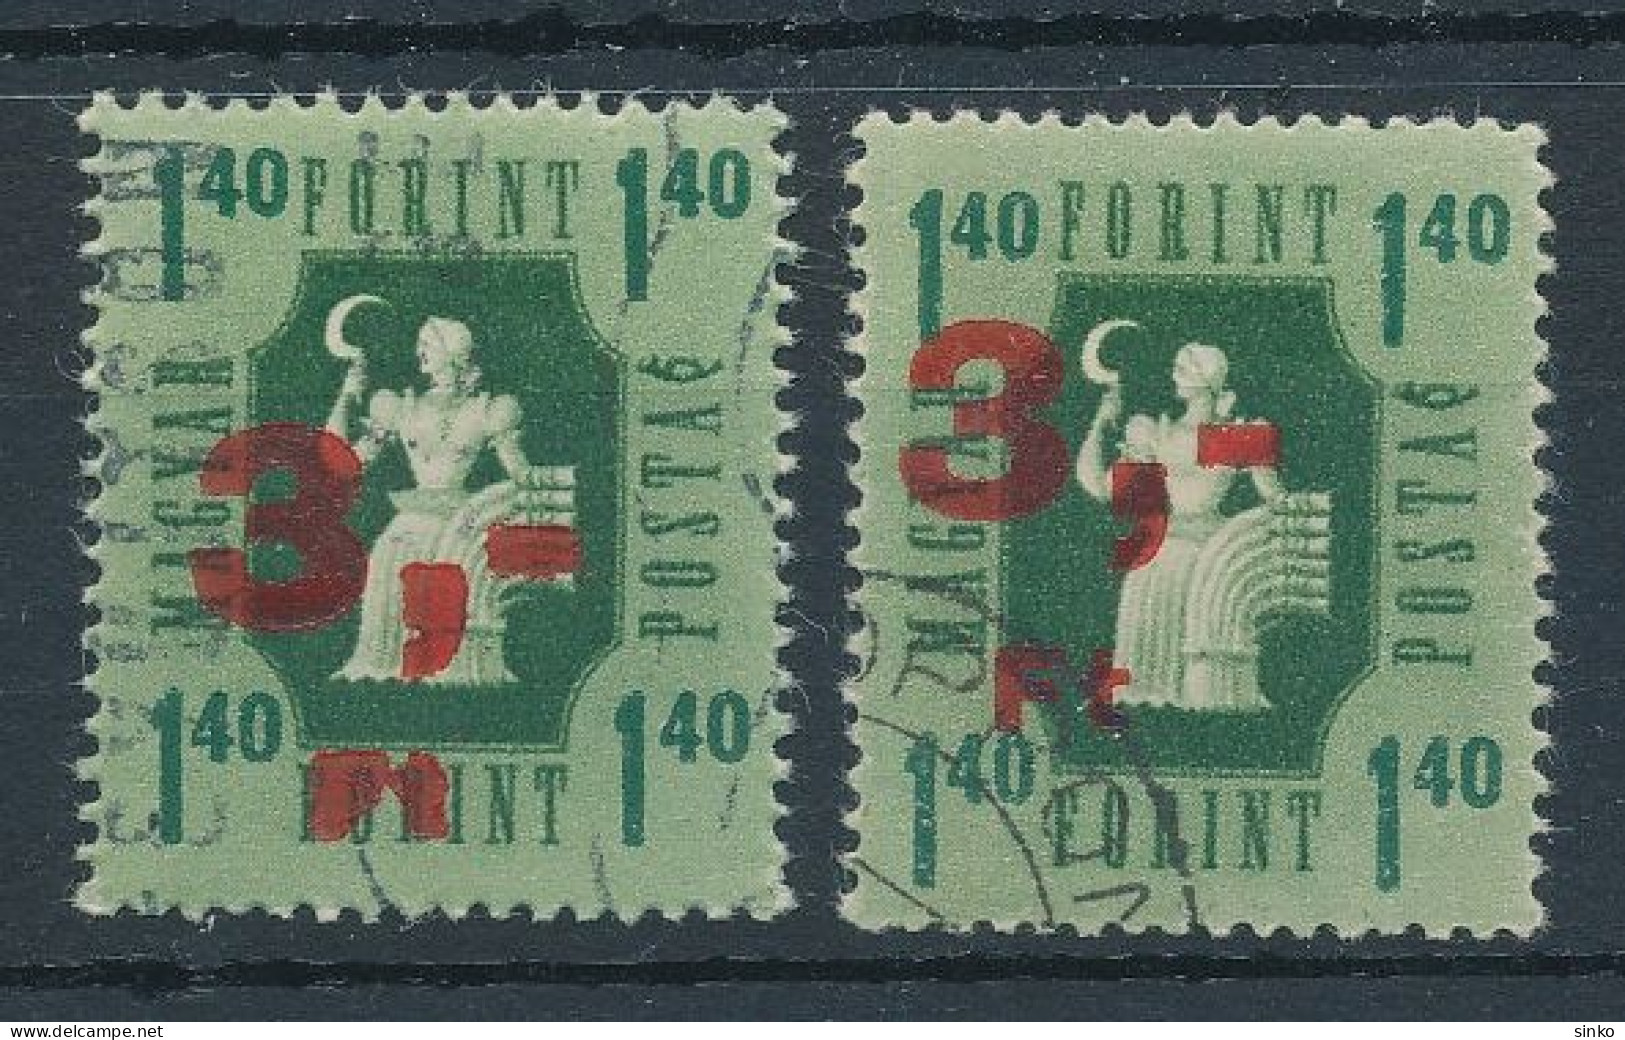 1953. Auxiliary Stamps (V.) - Misprint - Errors, Freaks & Oddities (EFO)